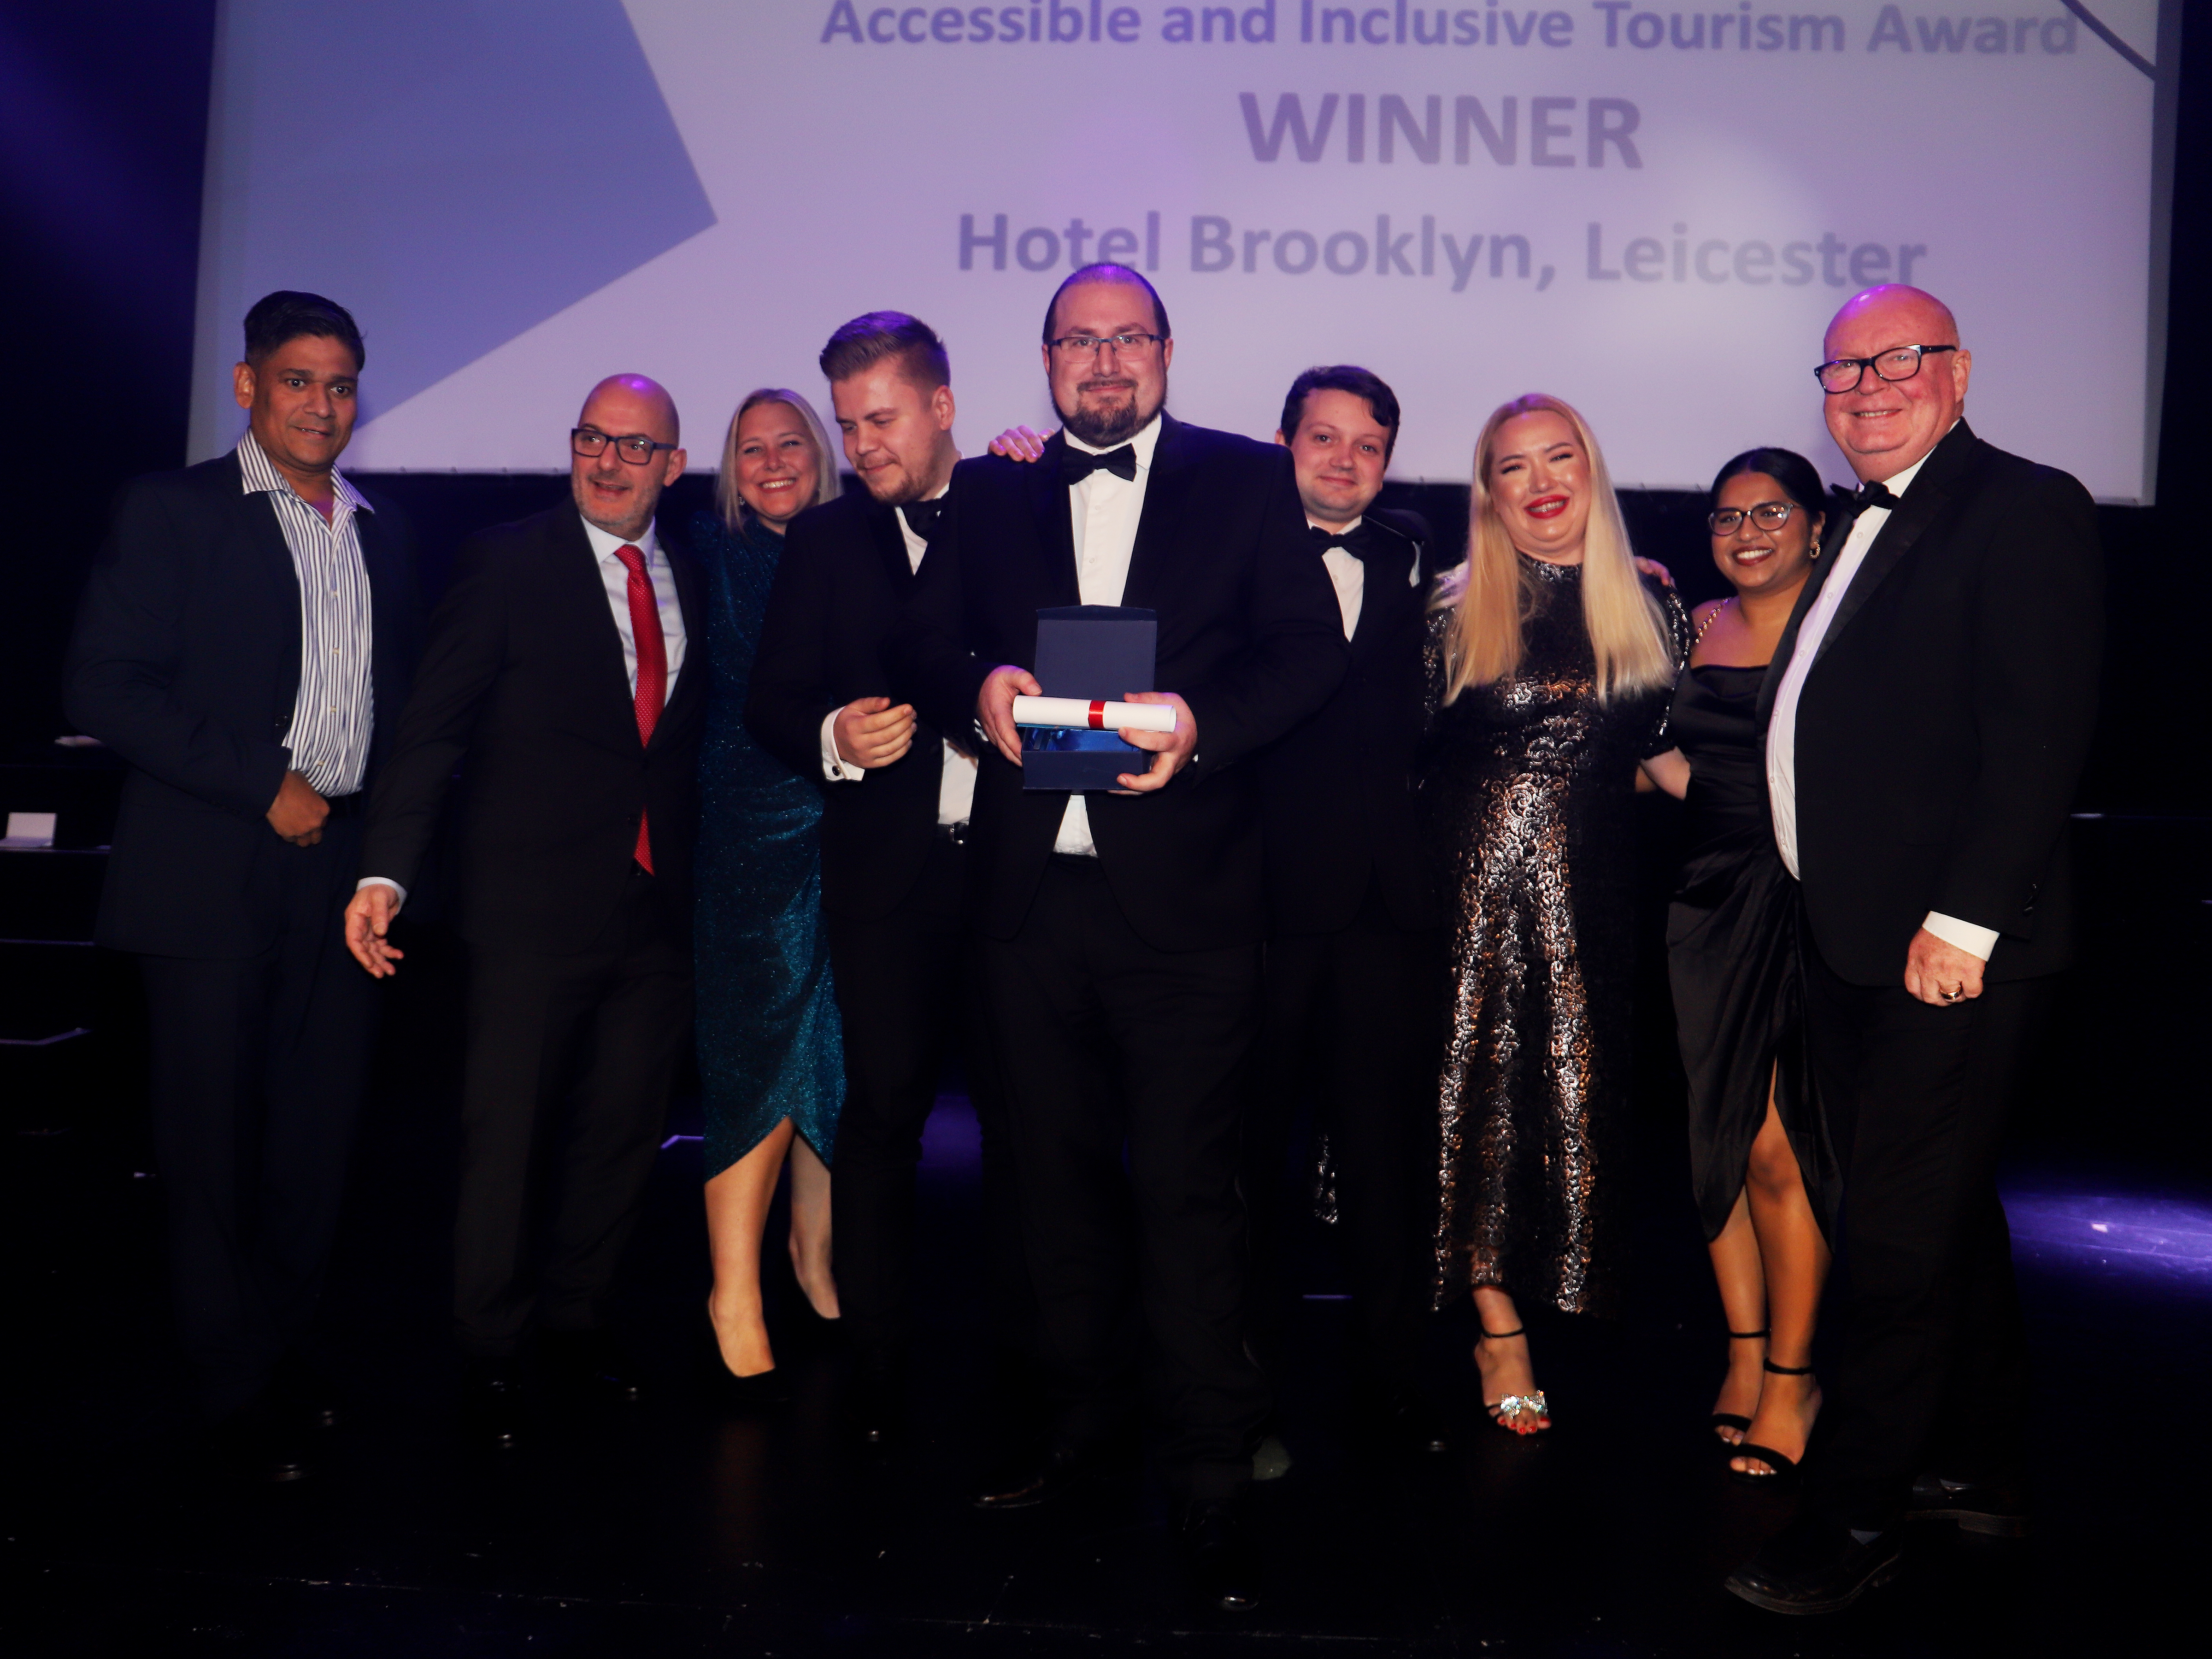 Hotel Brooklyn, Leicester - WINNER - Accessible and Inclusive Tourism